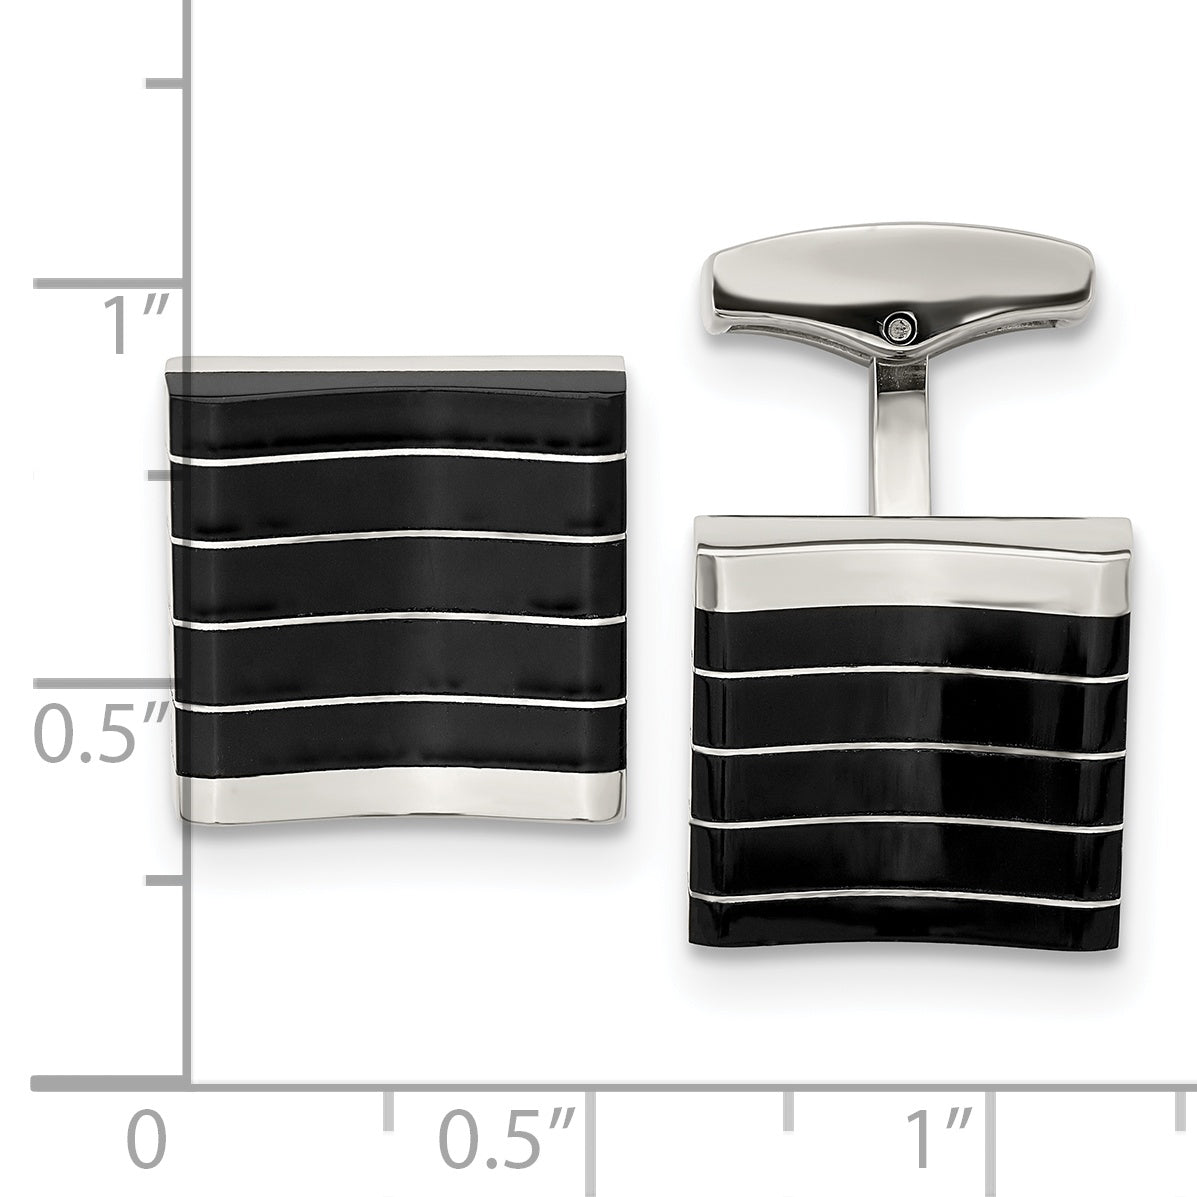 Stainless Steel Polished Black Cat's Eye Square Cufflinks